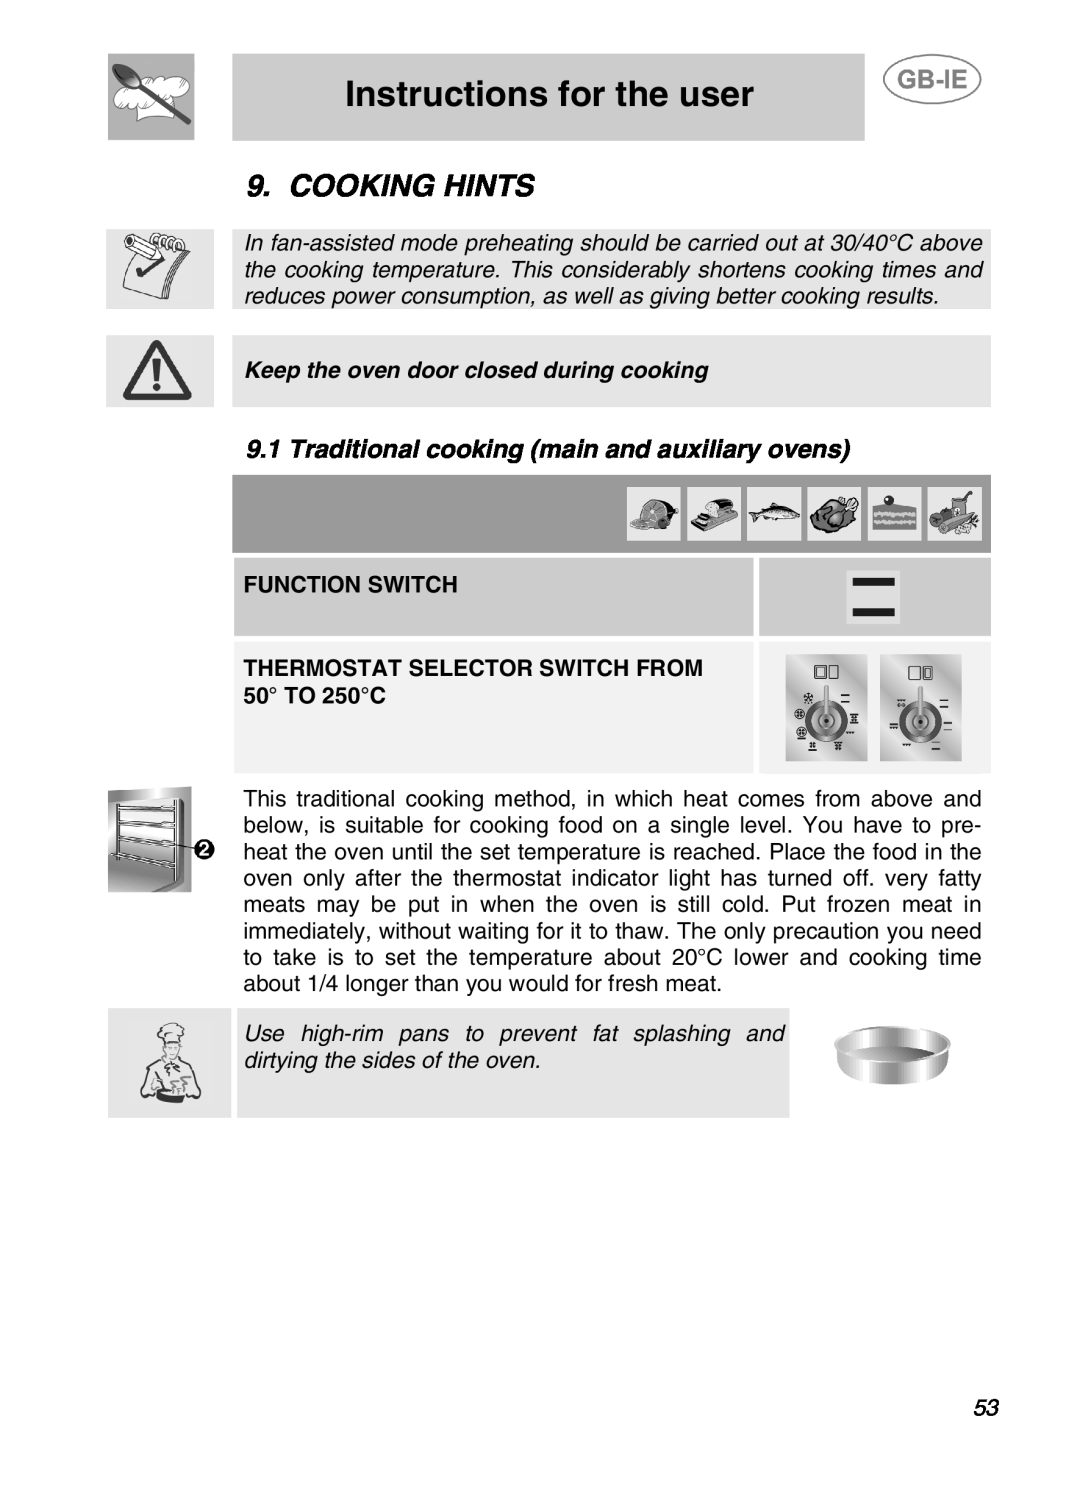 Smeg A2-5, A2-2 Cooking Hints, Traditional cooking main and auxiliary ovens, Instructions for the user, Function Switch 